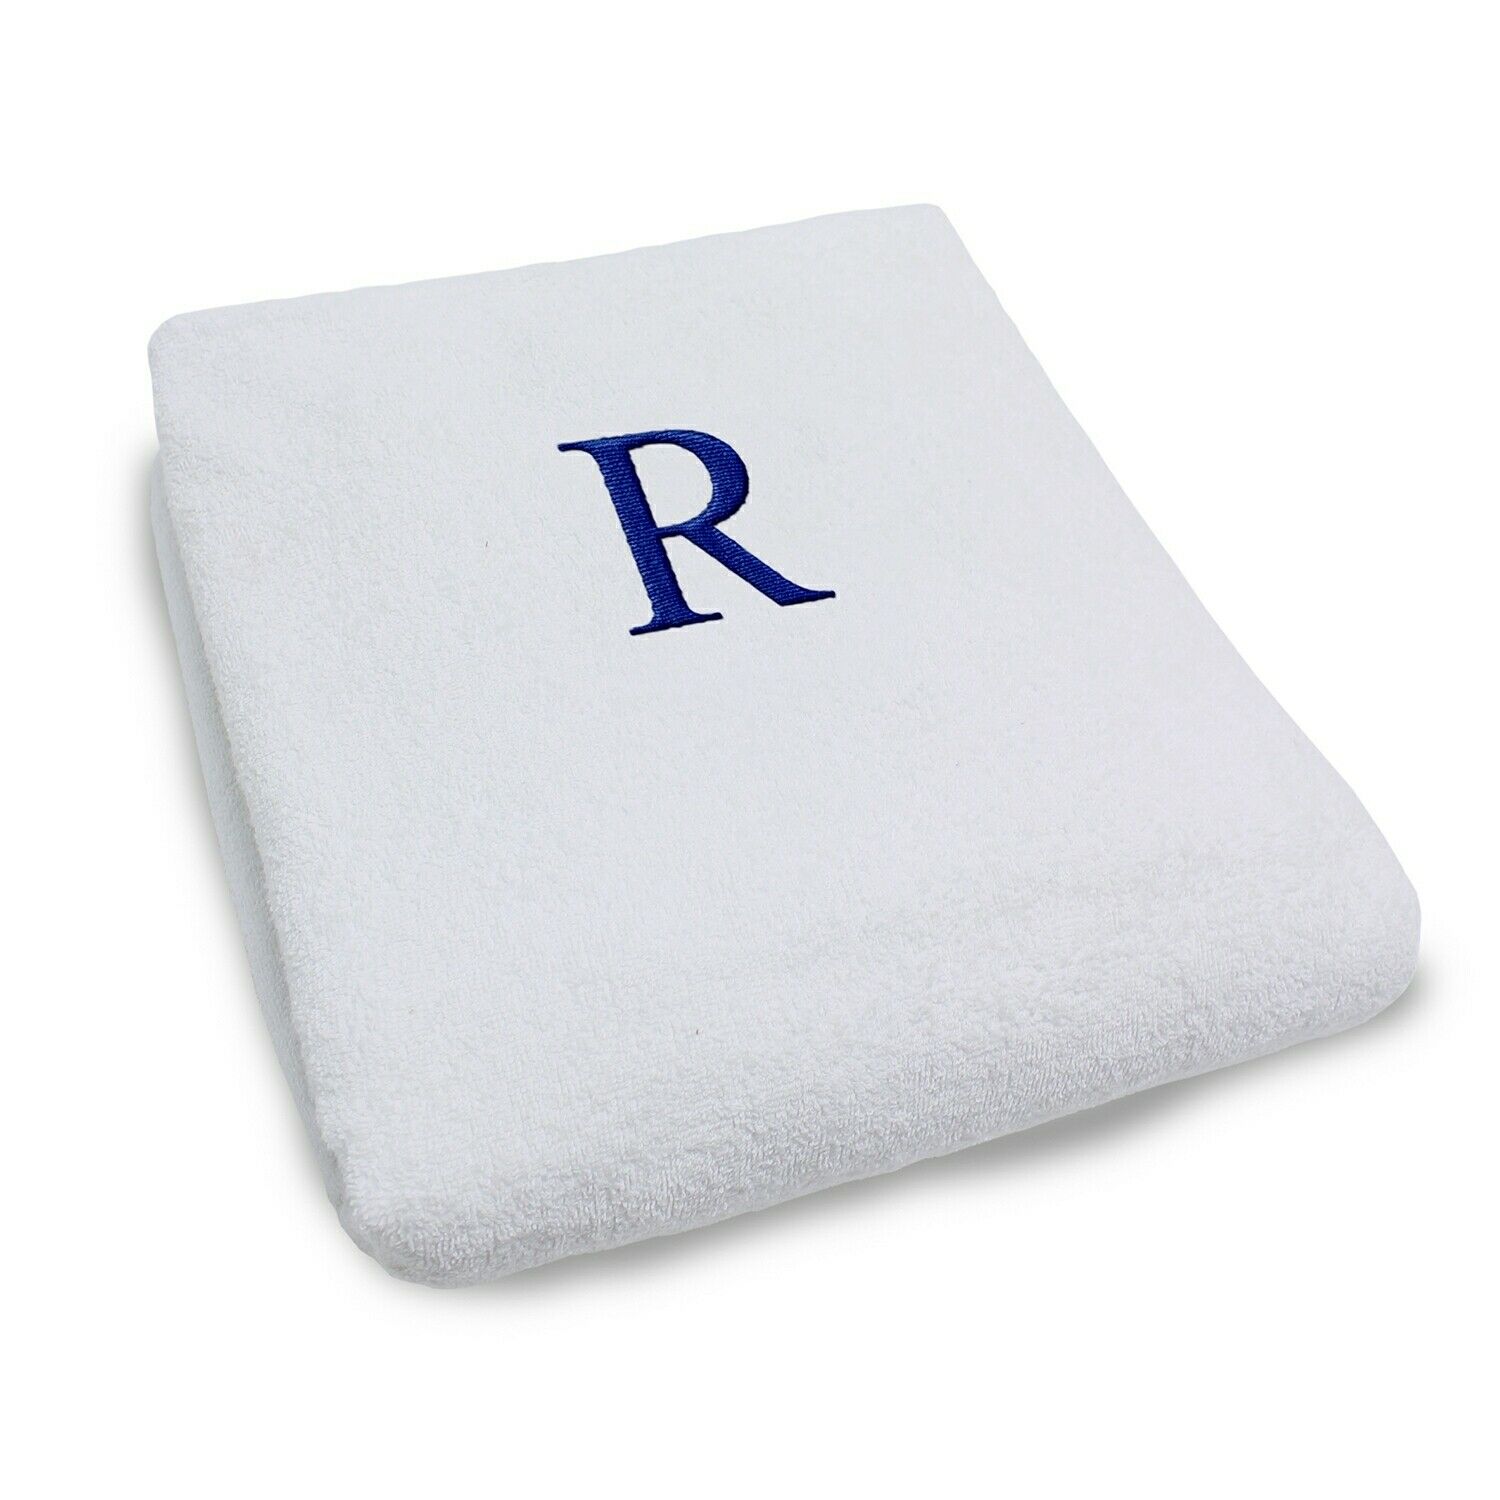 Blue Nile Mills Blue Monogrammed Cotton Ultra Soft Highly Absorbent Patio Chaise Outdoor Garden Beach Pool Towel Lounge Chair Slip Cover